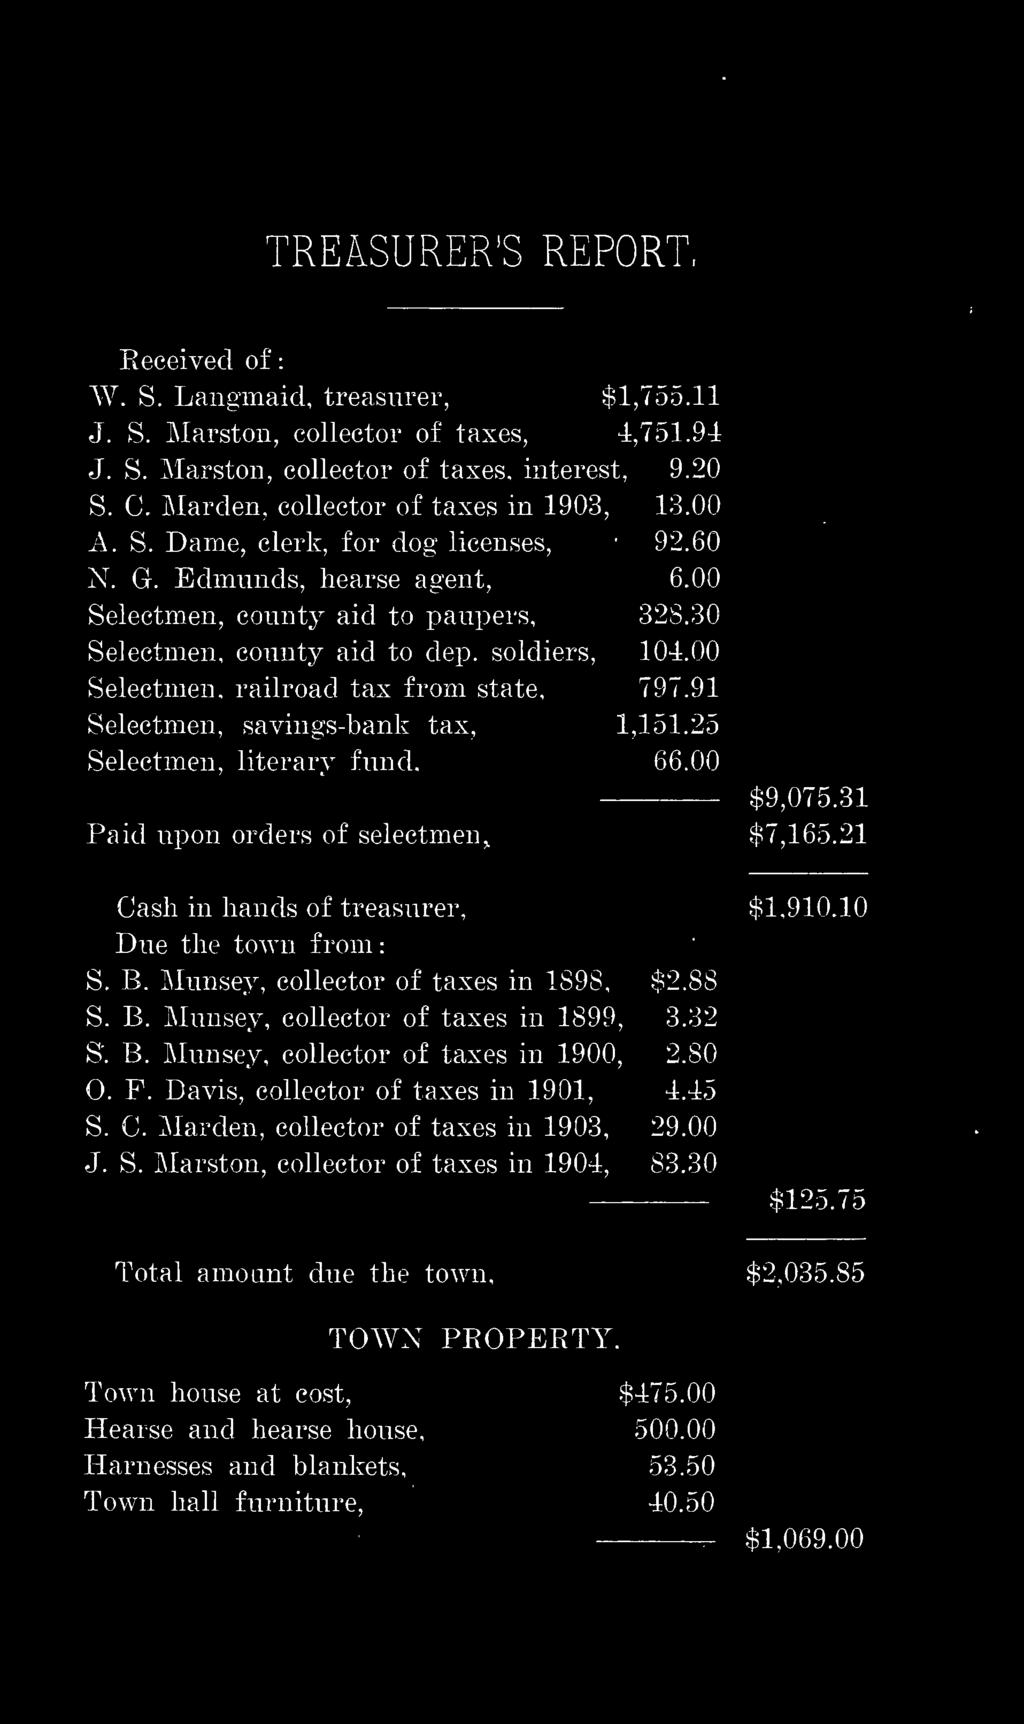 soldiers, 104.00 Selectmen, railroad tax from state, 797.91 Selectmen, savings-bank tax, 1,151.25 Selectmen, literary fund. 66.00 $9,075.31 Paid upon orders of selectmen^ $7,165.